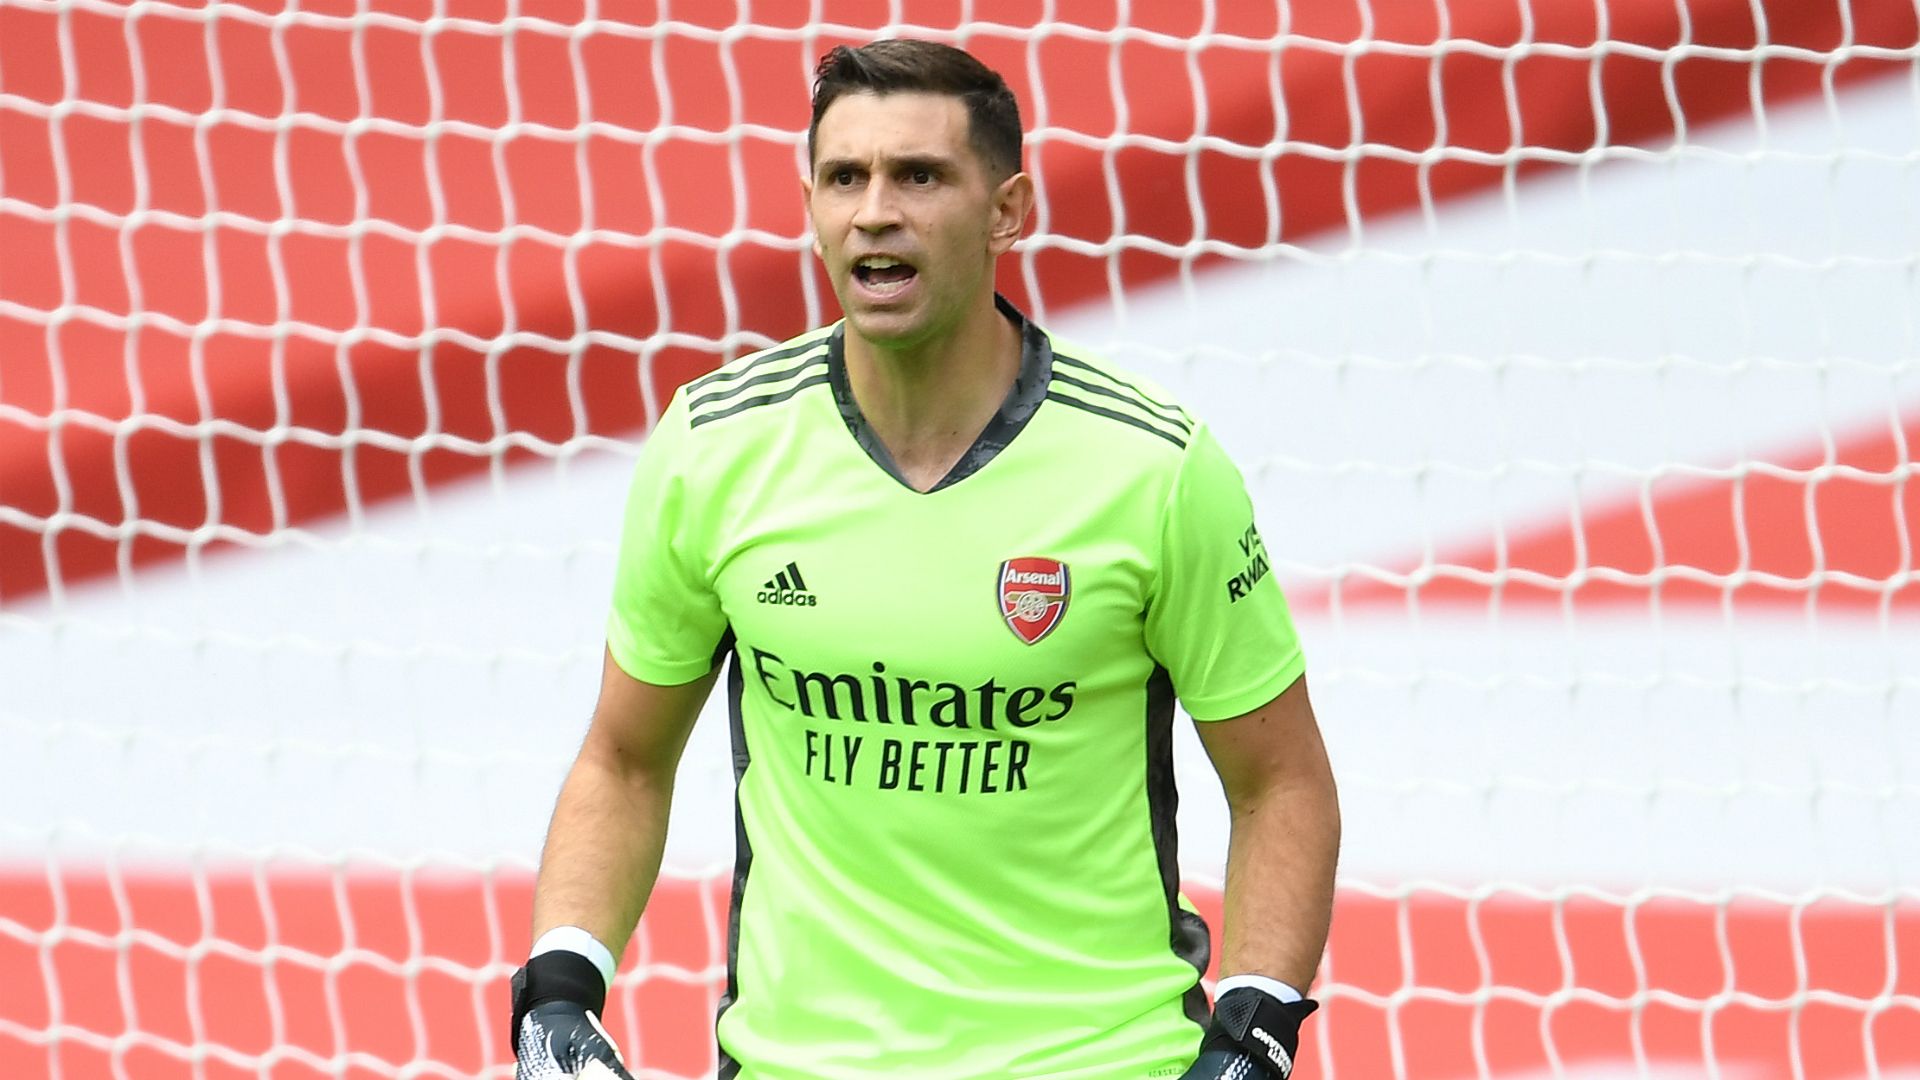 Arsenal keeper Martinez in emotional farewell ahead of reported Villa move